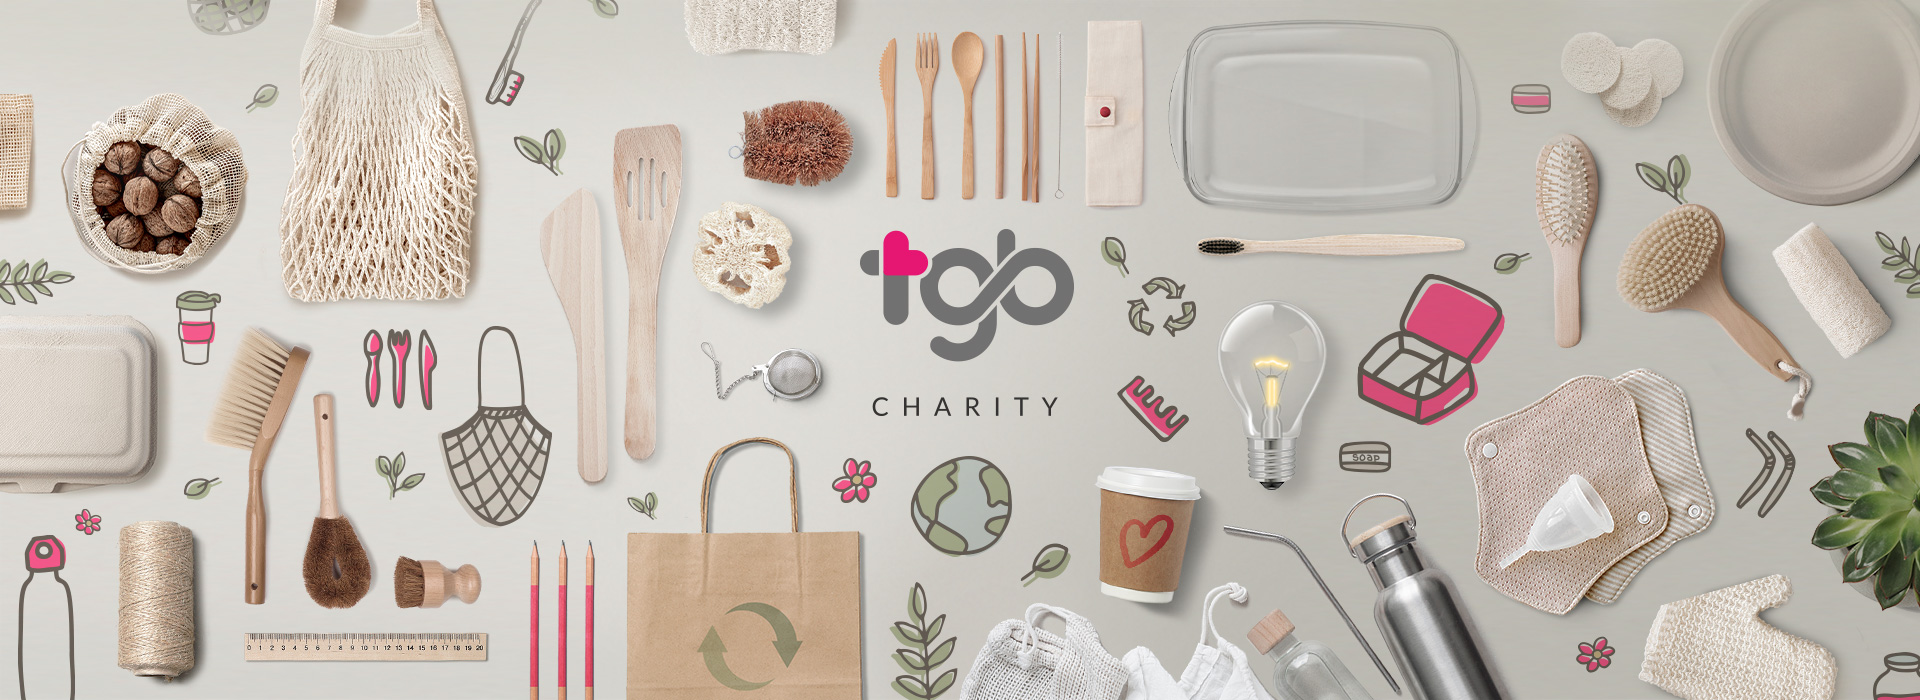 TGB Charity - How brands are leading the charge